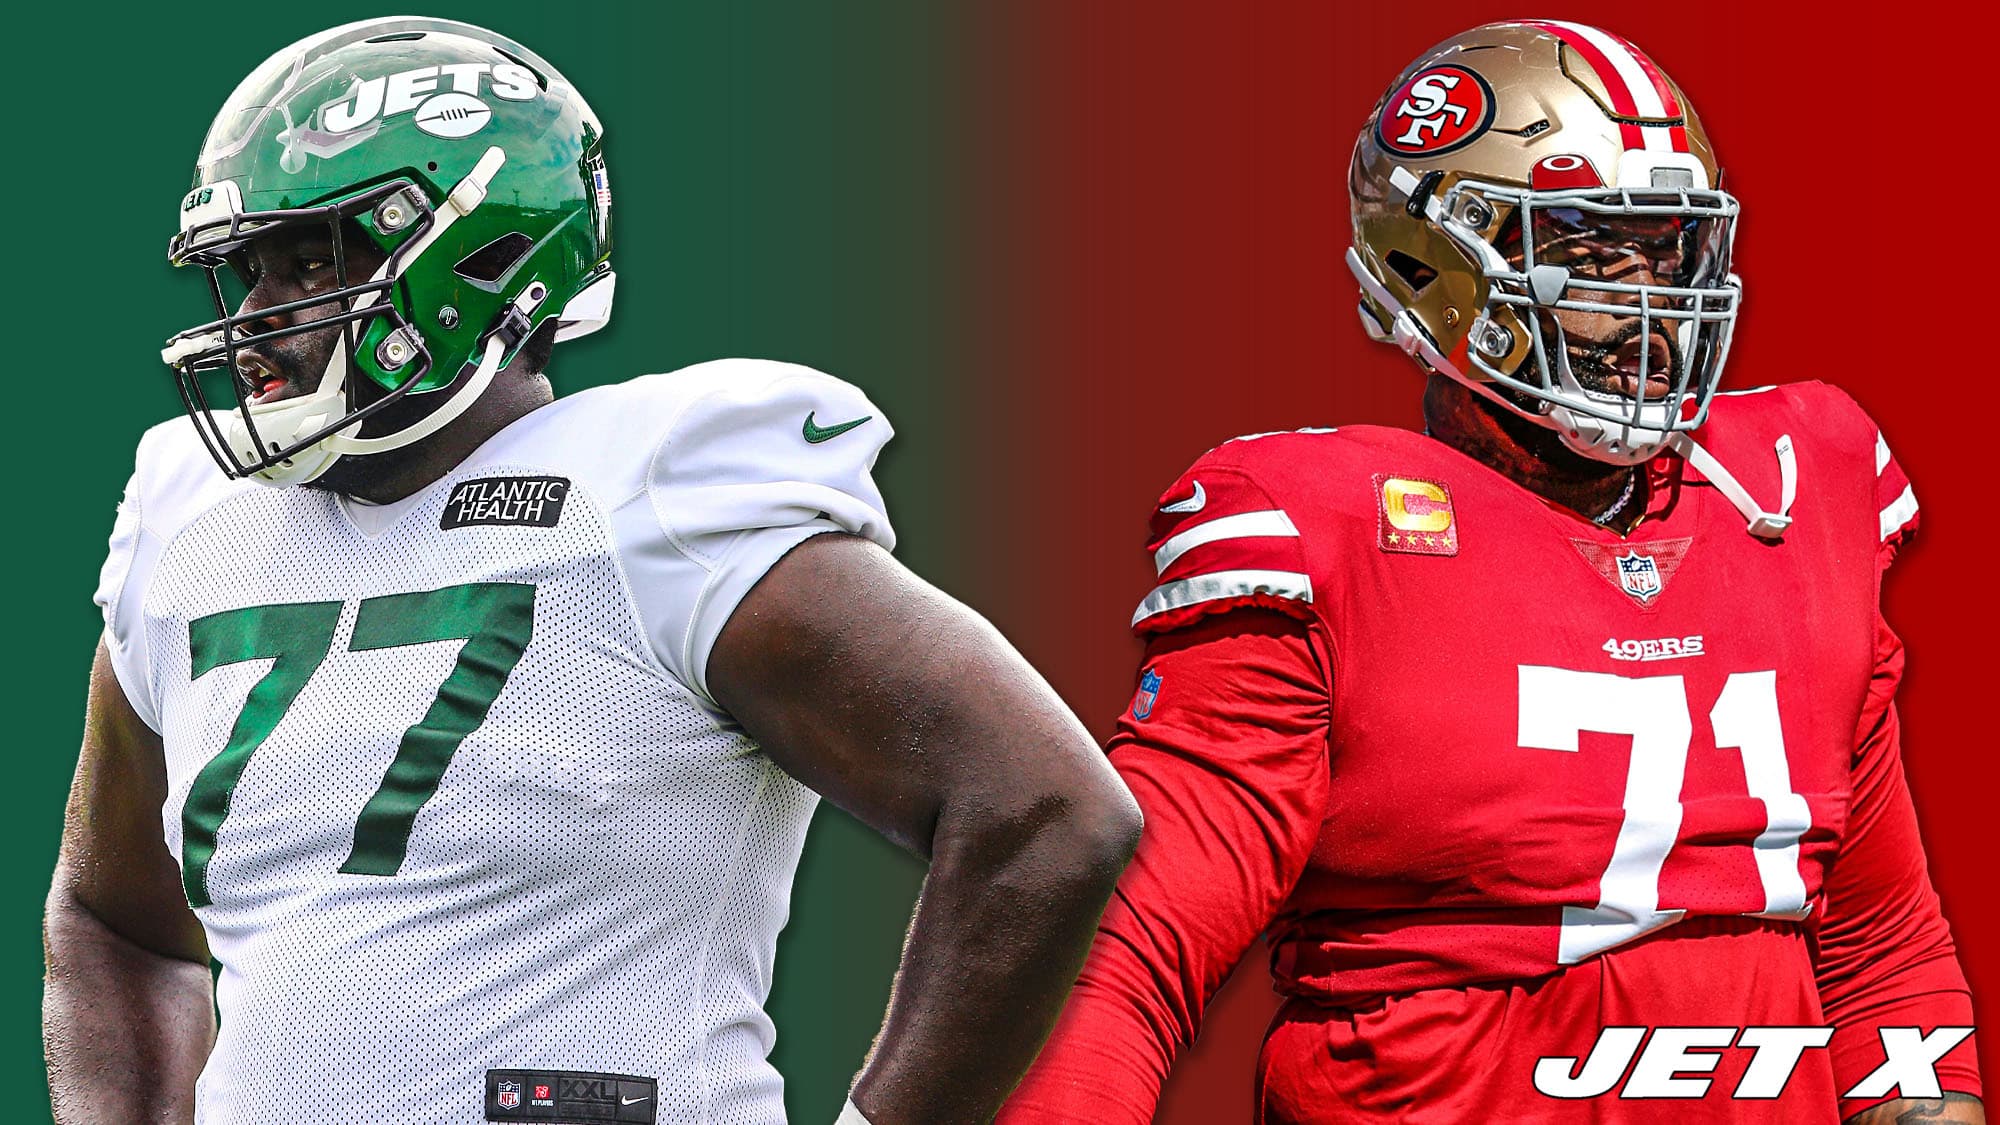 Mike LaFleur and the NY Jets will most likely use Mekhi Becton like the San Francisco 49ers did with Trent Williams.